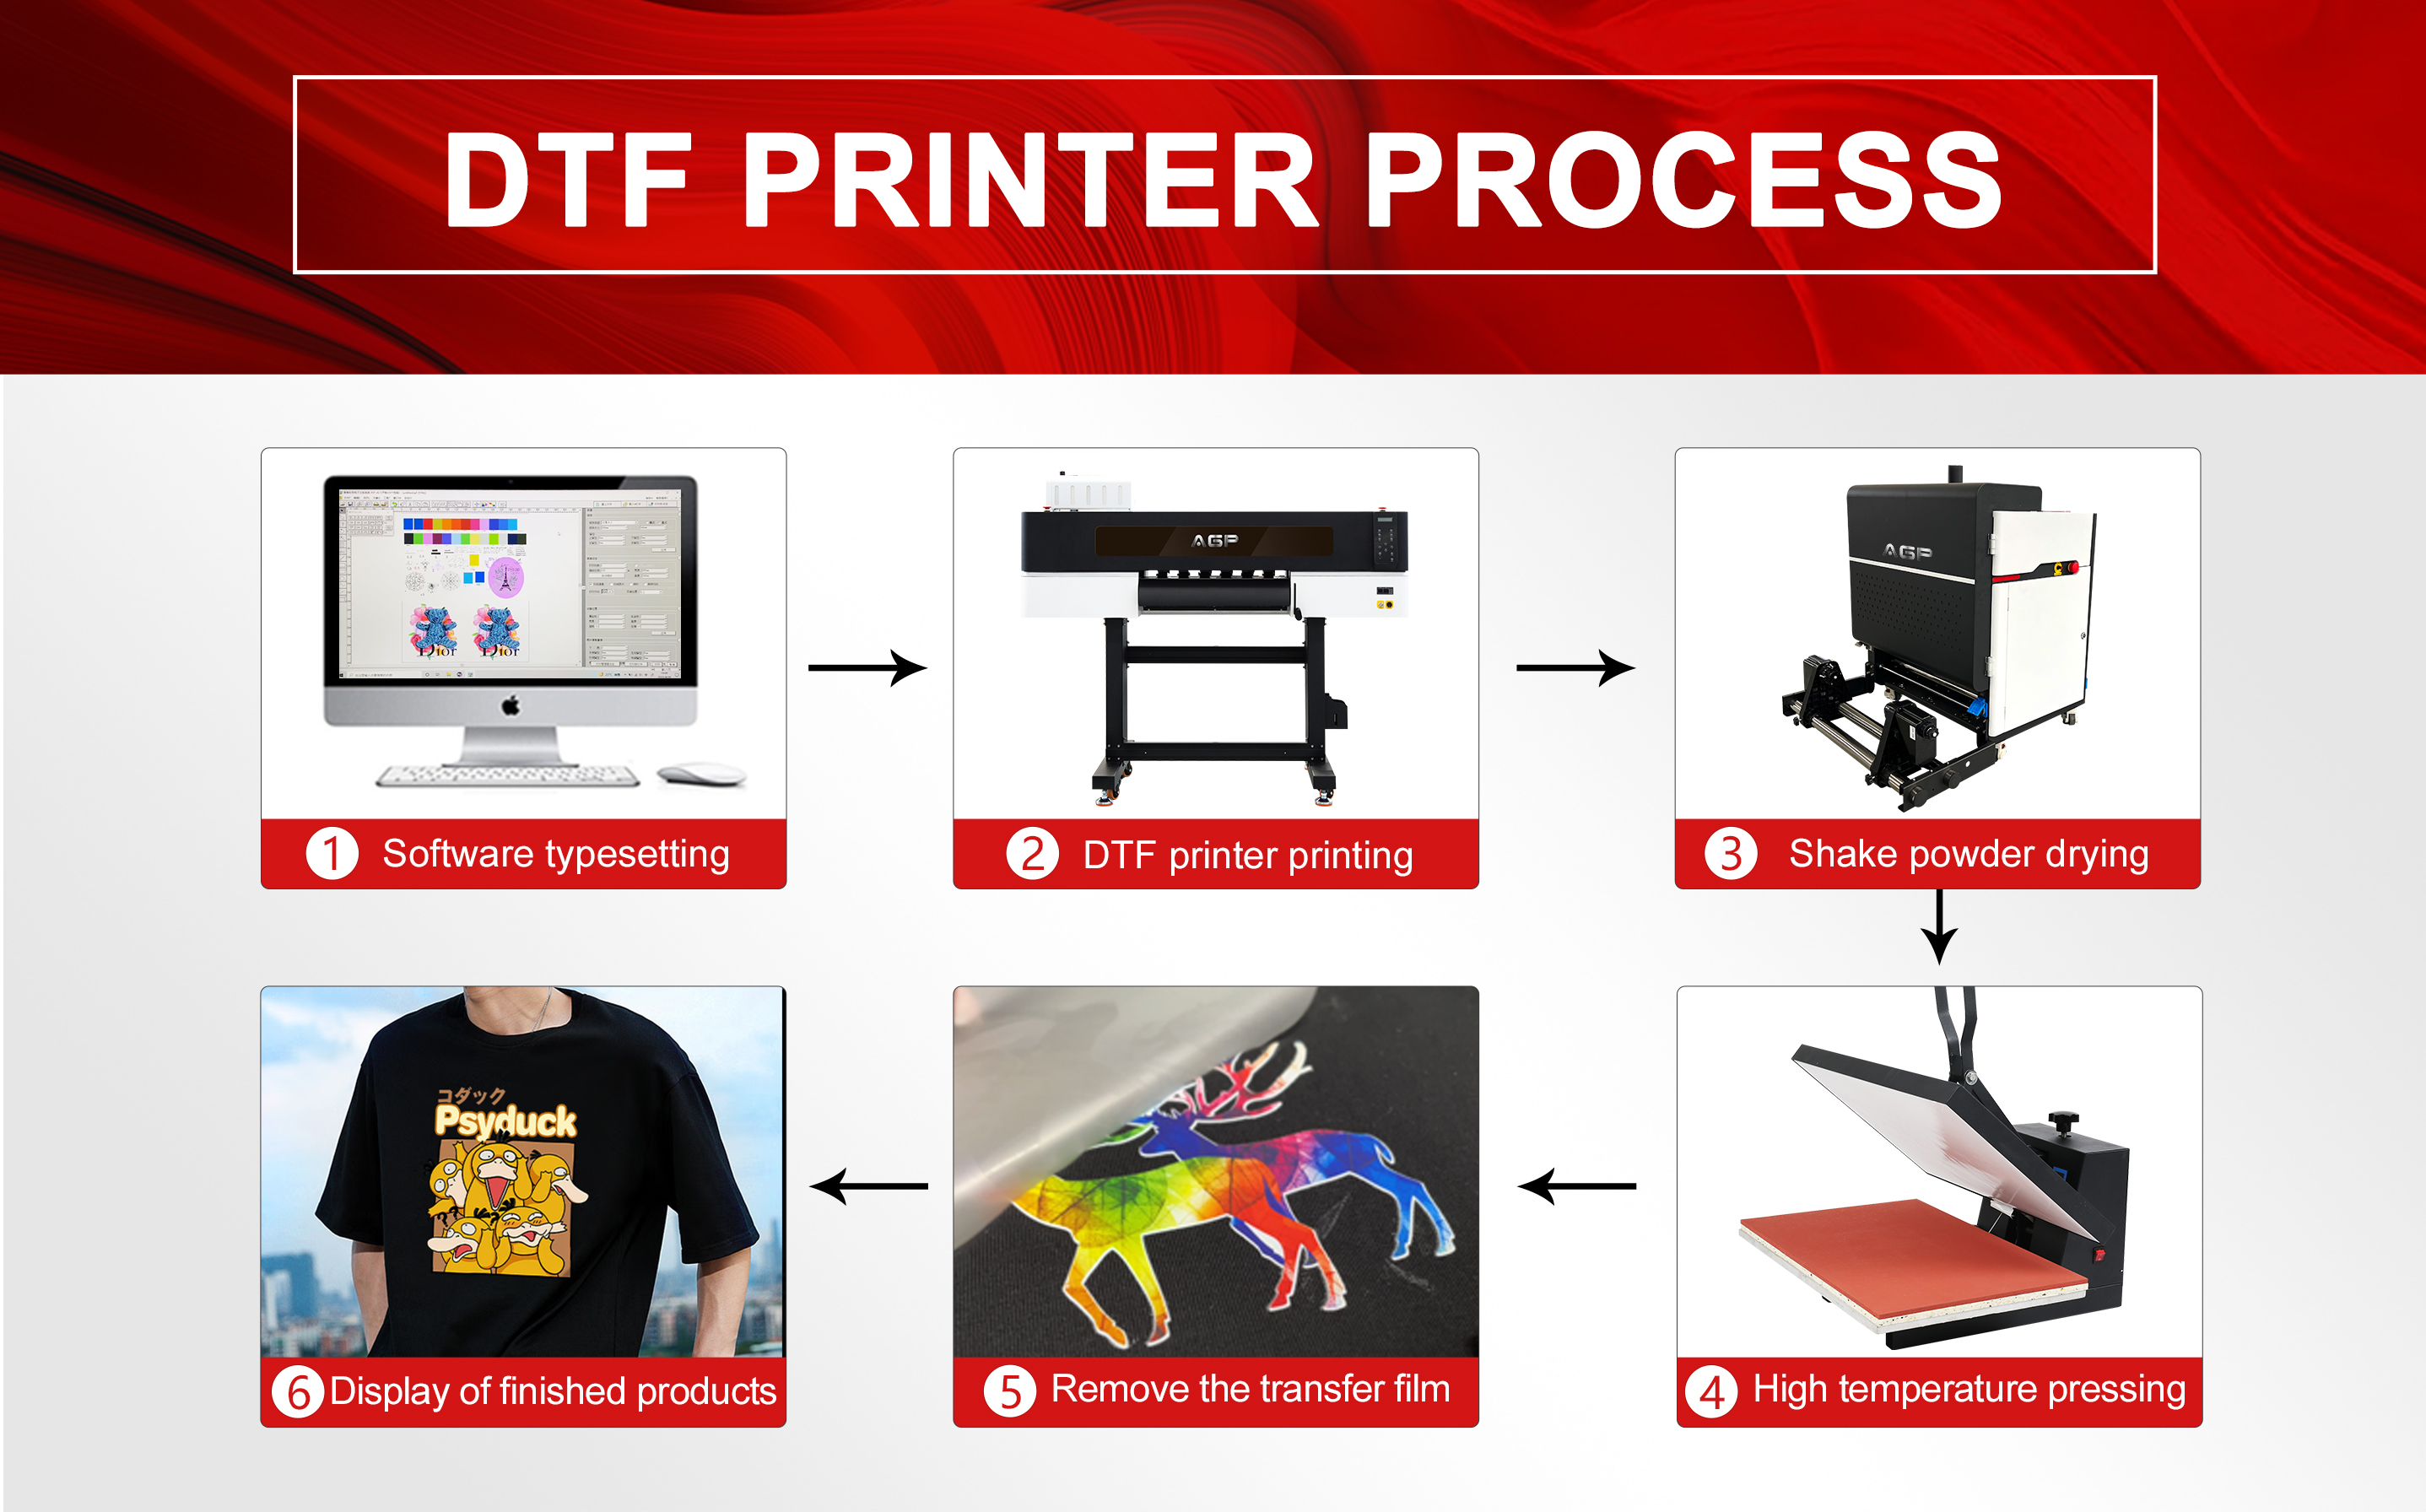 How Does a DTF Printer Work?